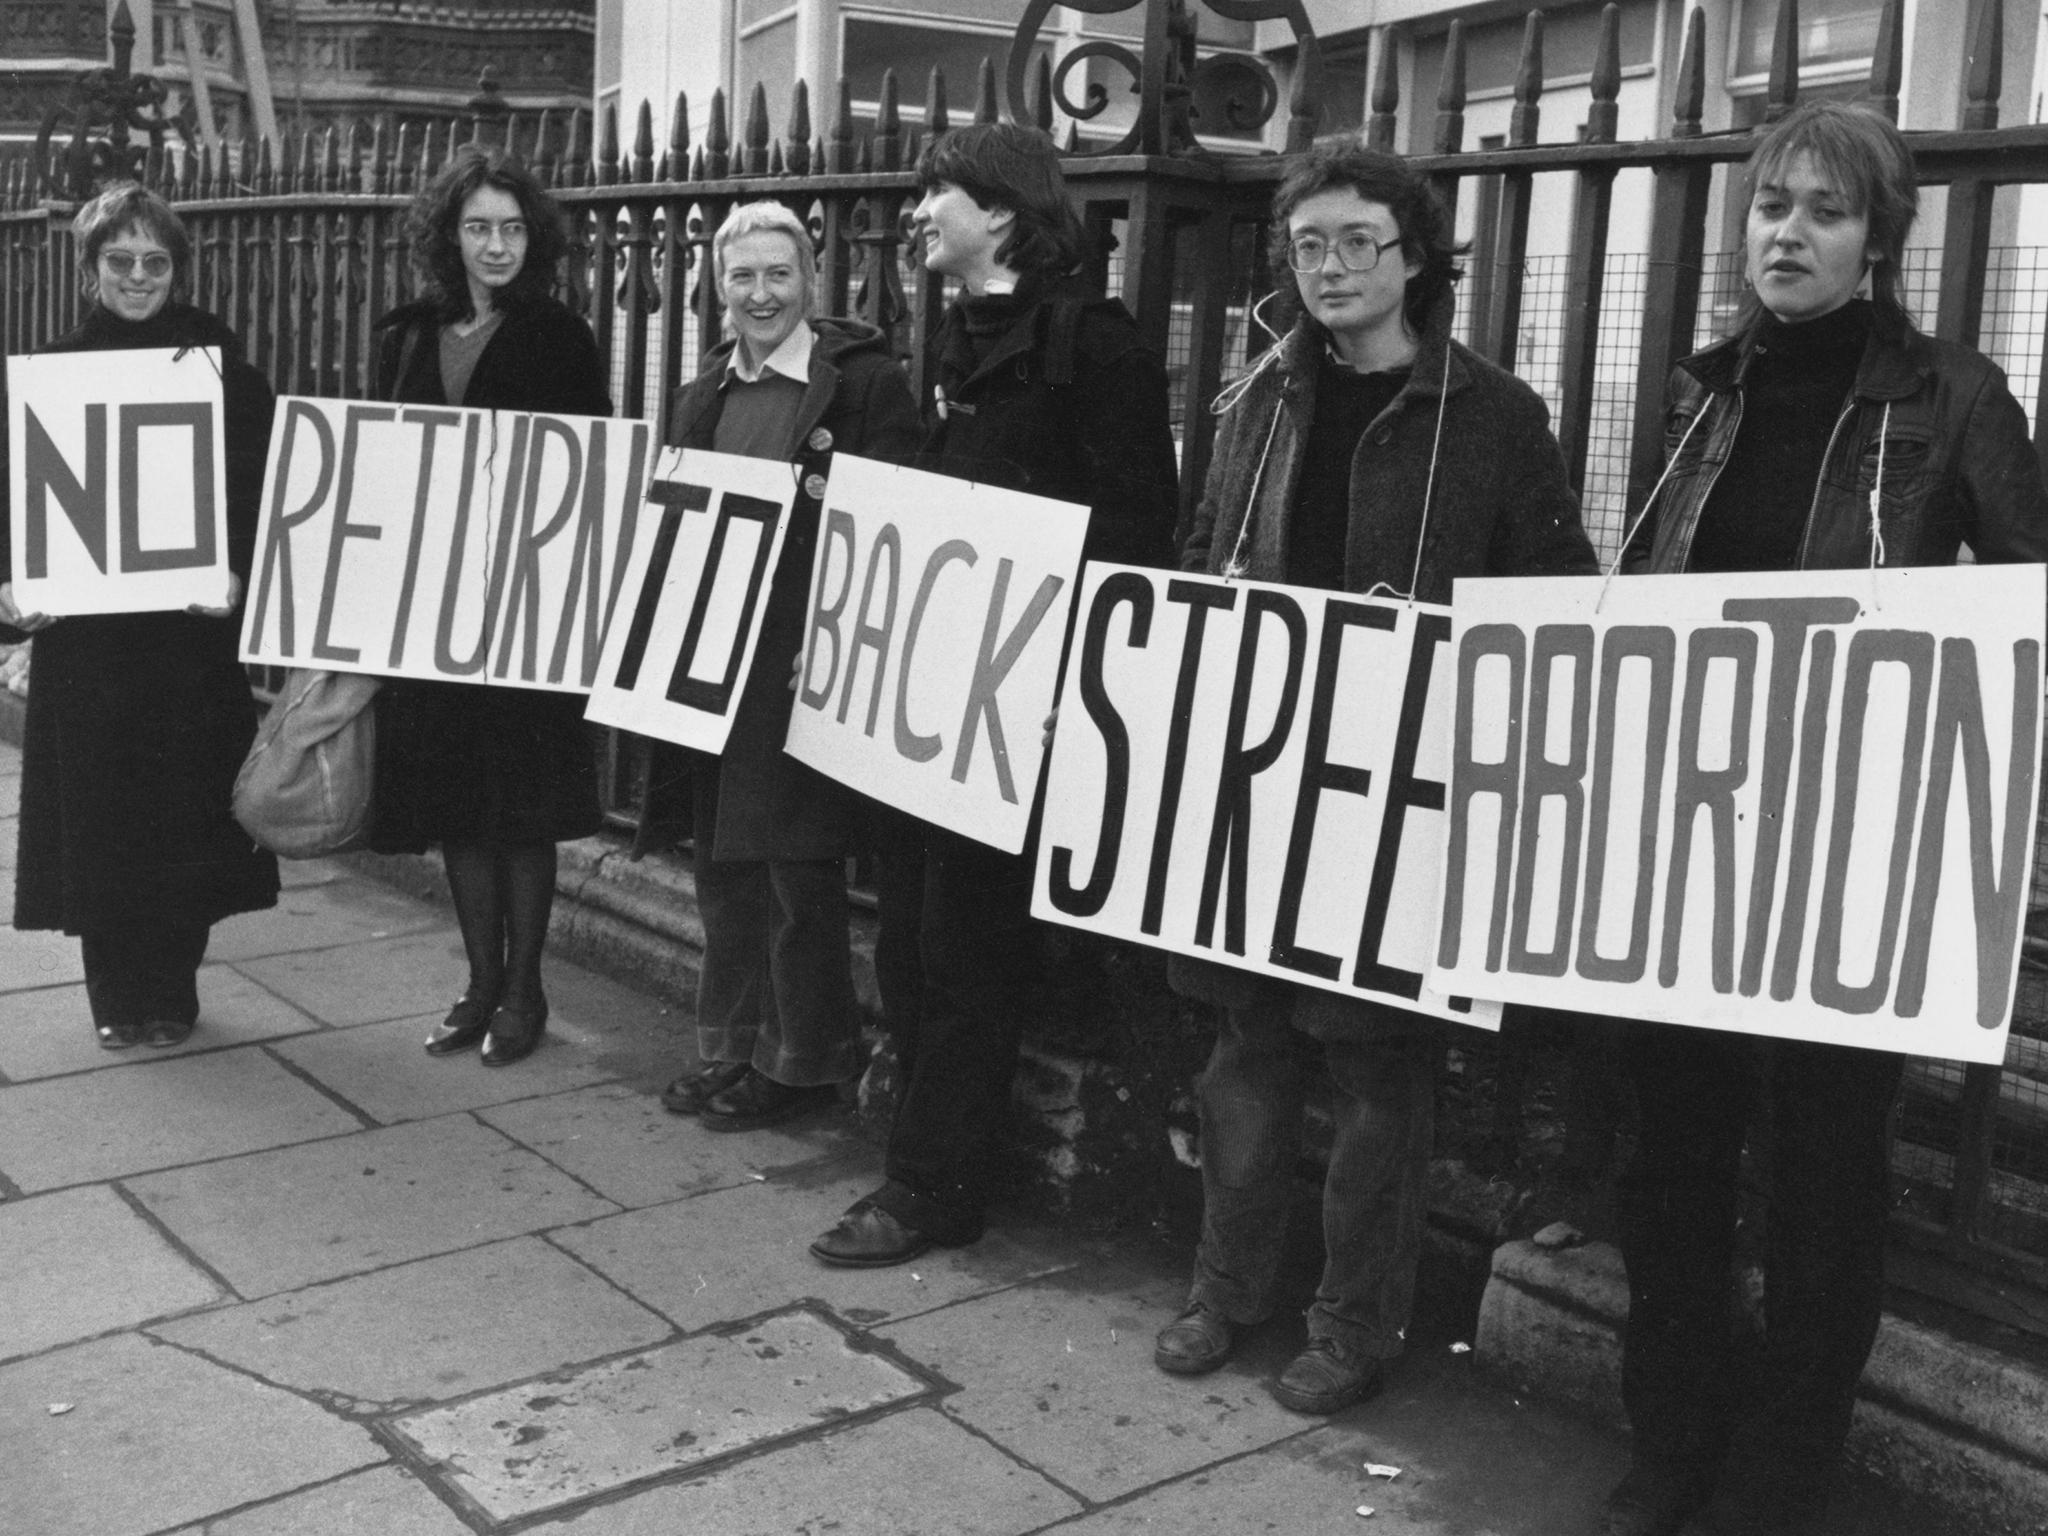 A group of women demonstrating in favour of legal abortions with a banner declaring 'No Return To Backstreet Abortions' circa 1980.